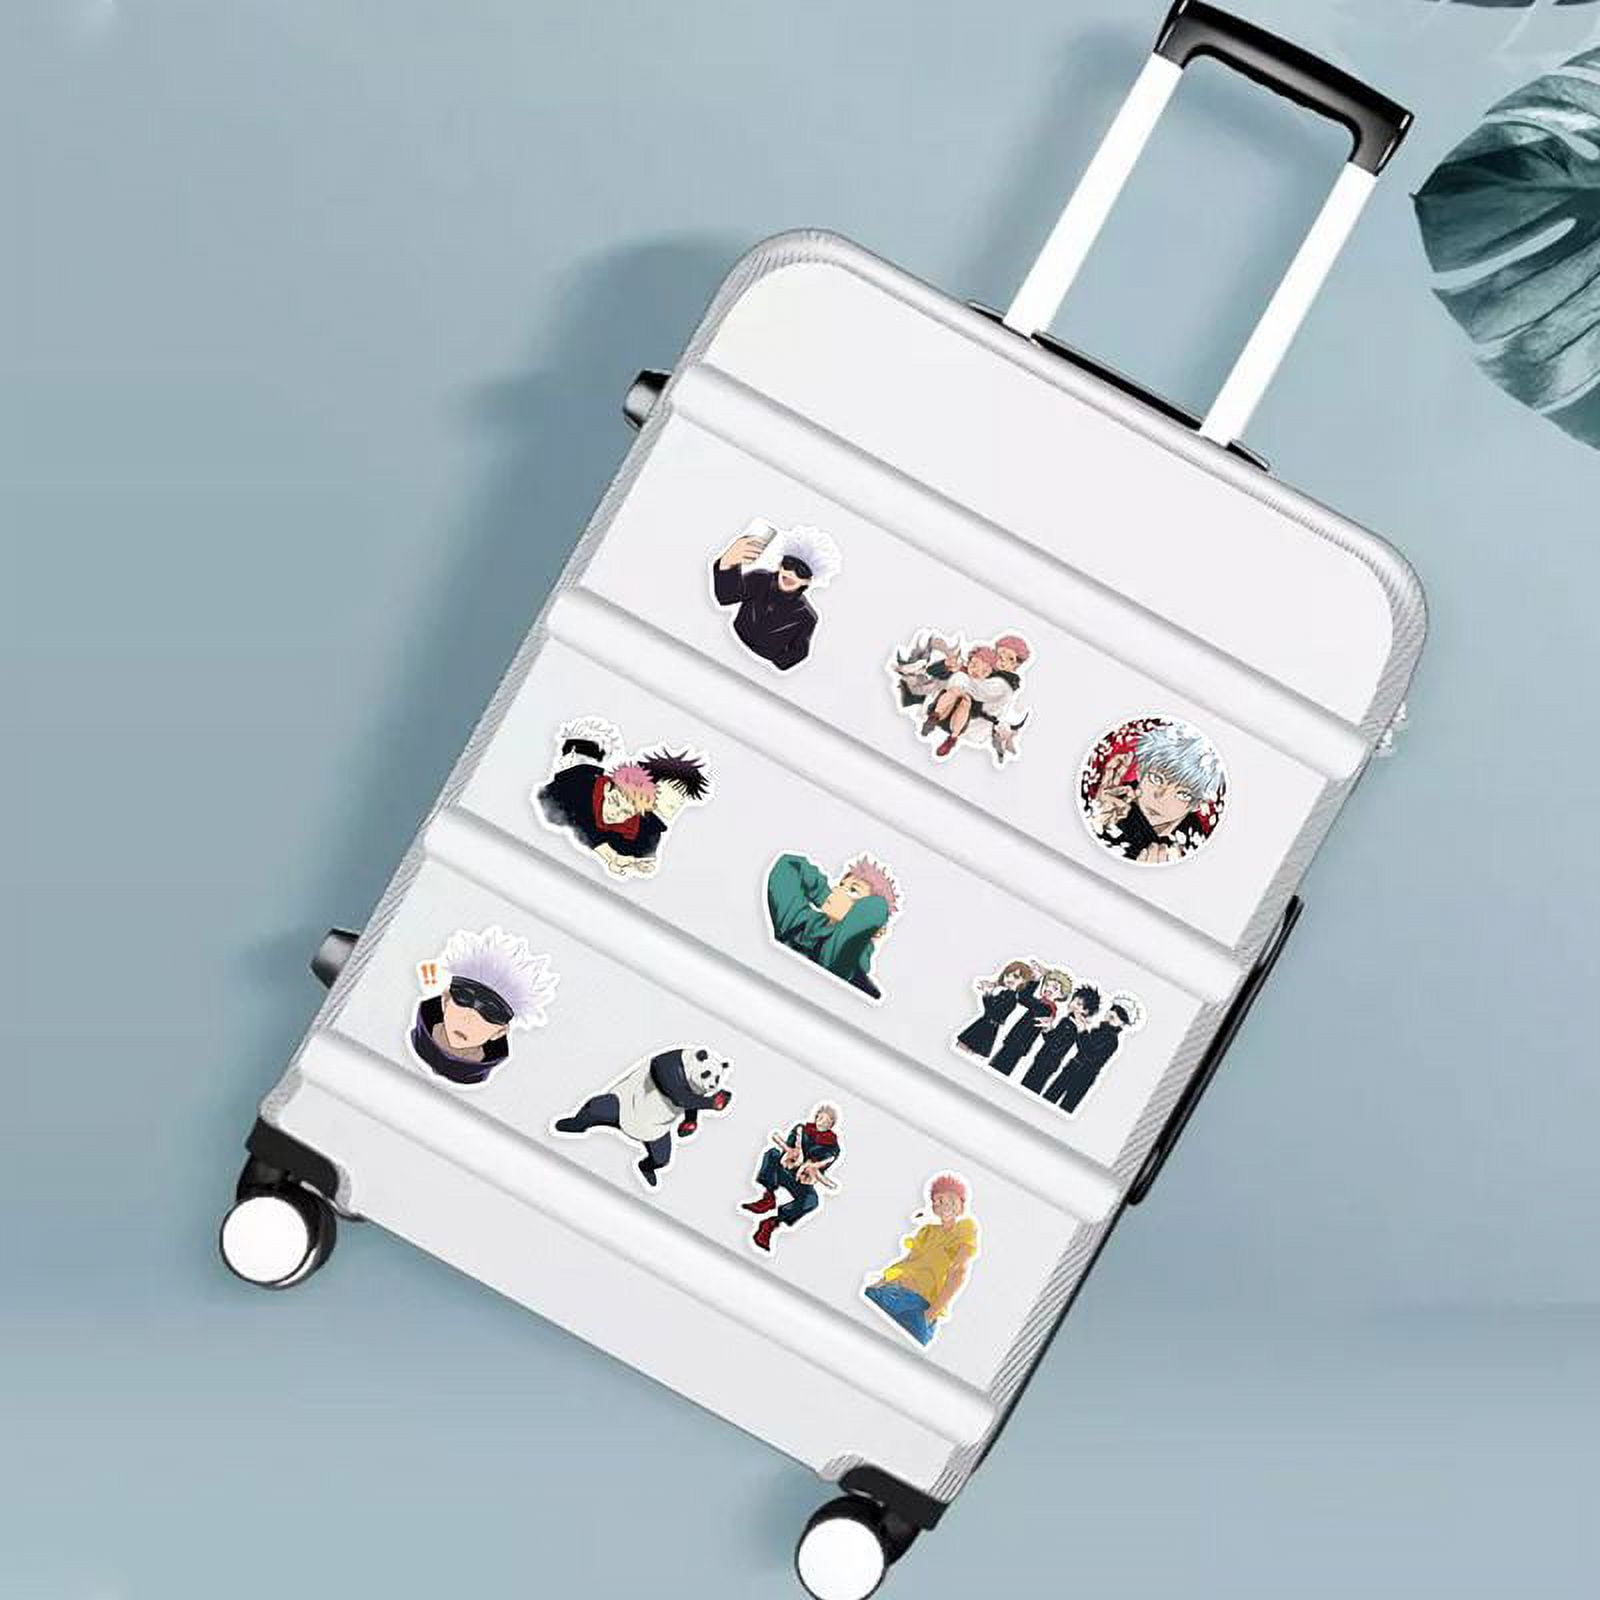 Bts Stickers 76pcs Waterproof Vinyl Kpop Stickers Are Auitable For Laptops  Macbook, Skateboards, Luggage, Cars, Bikes, Bedroom, Motorcycle, Ps4, Xbox